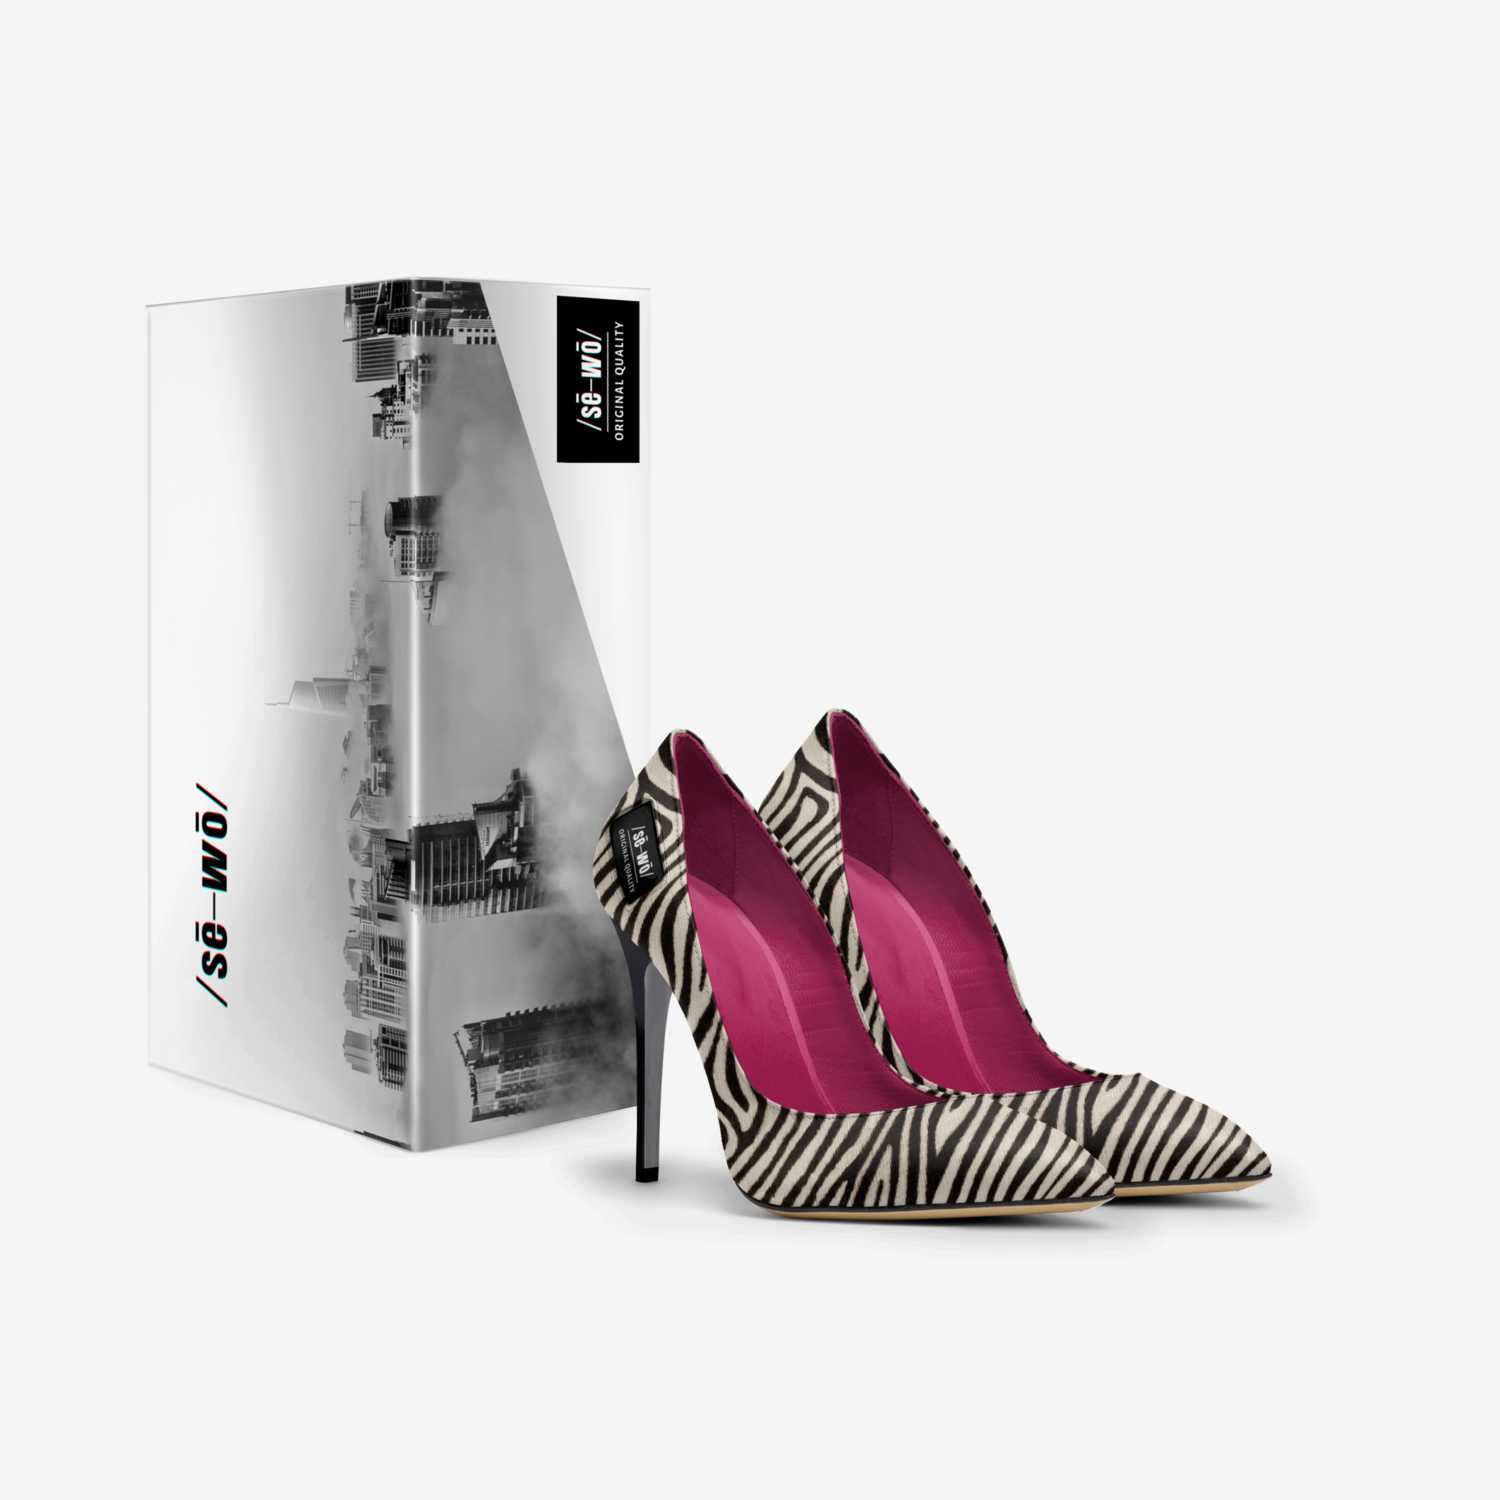 /sē-wō/ custom made in Italy shoes by Jessica Barnes | Box view